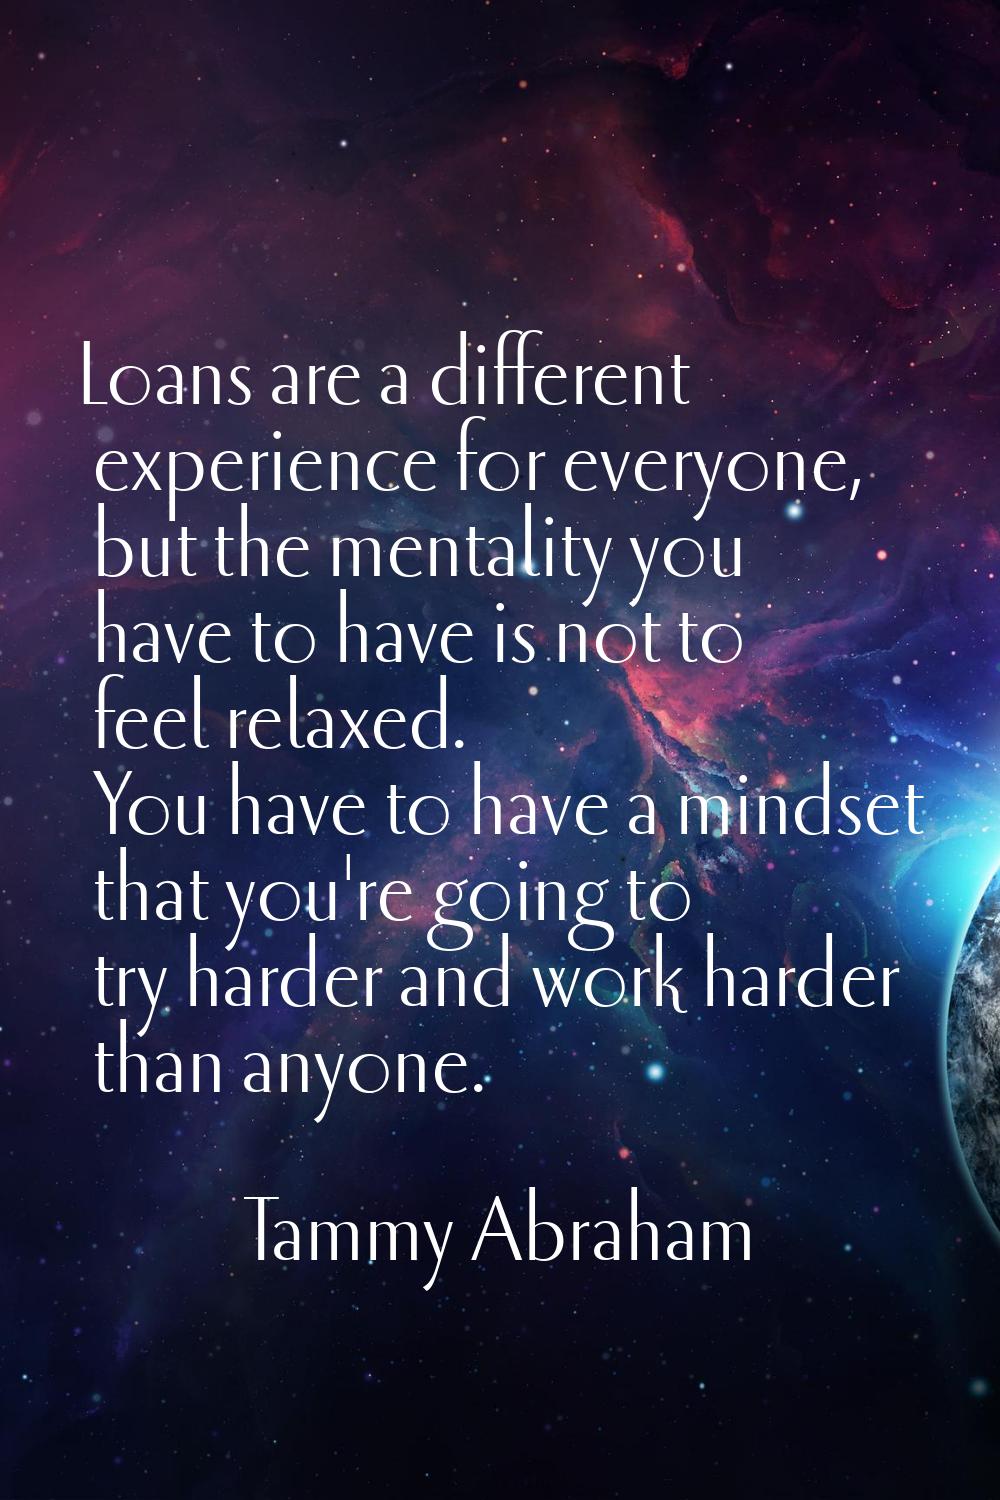 Loans are a different experience for everyone, but the mentality you have to have is not to feel re